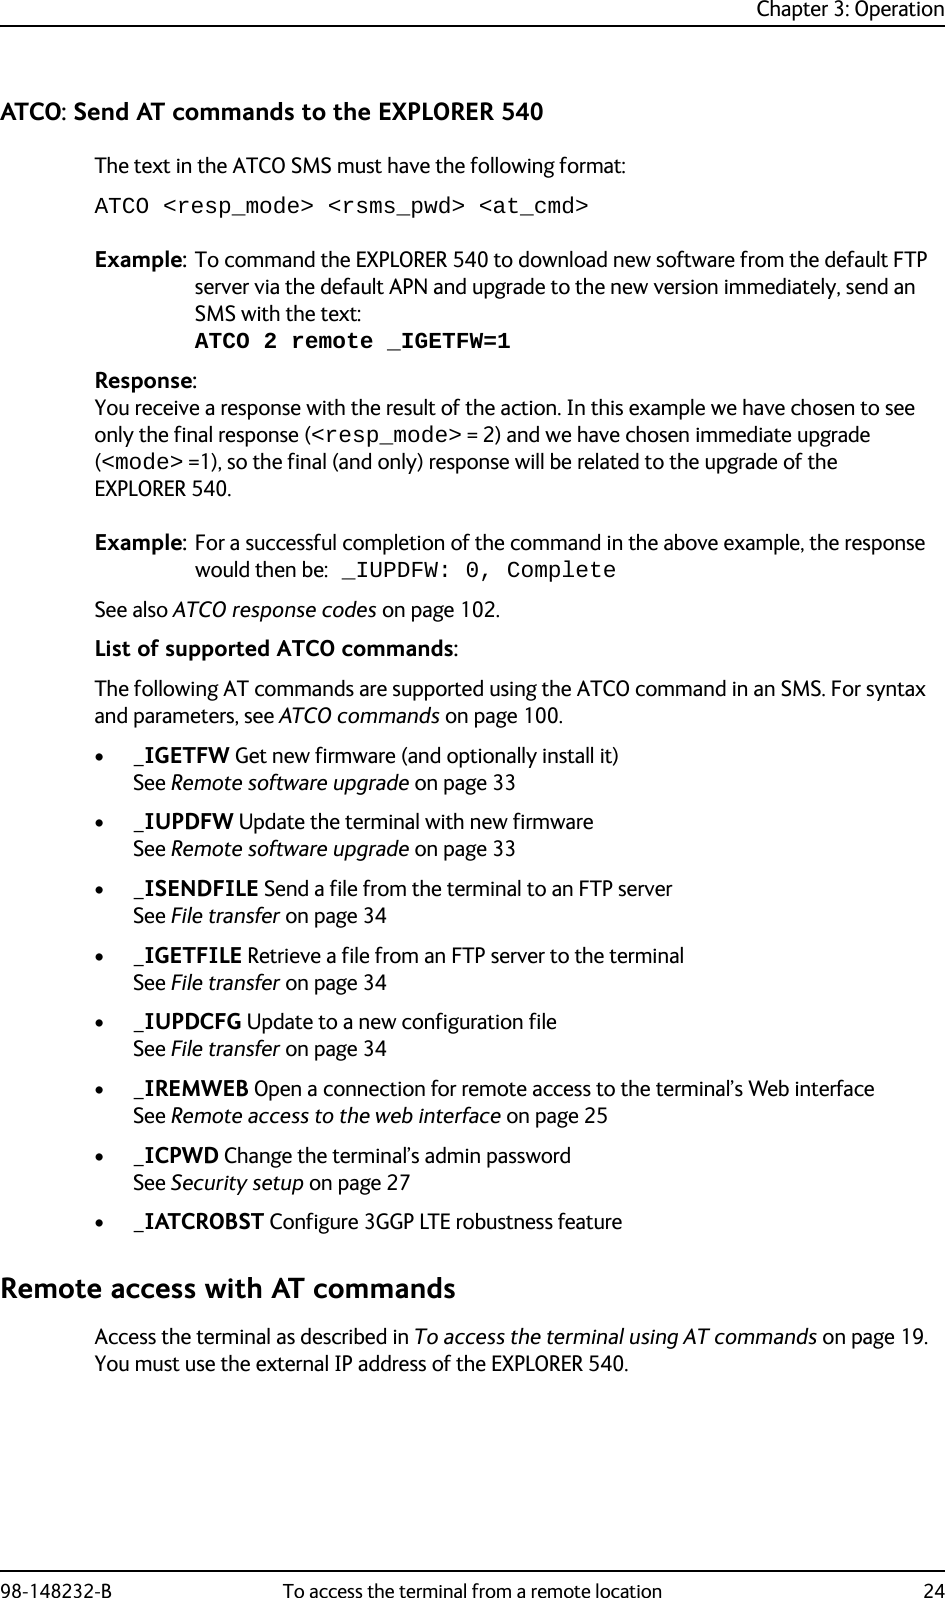 Chapter 3: Operation98-148232-B To access the terminal from a remote location 24ATCO: Send AT commands to the EXPLORER 540The text in the ATCO SMS must have the following format:ATCO &lt;resp_mode&gt; &lt;rsms_pwd&gt; &lt;at_cmd&gt;Example: To command the EXPLORER 540 to download new software from the default FTP server via the default APN and upgrade to the new version immediately, send an SMS with the text: ATCO 2 remote _IGETFW=1Response:You receive a response with the result of the action. In this example we have chosen to see only the final response (&lt;resp_mode&gt; = 2) and we have chosen immediate upgrade (&lt;mode&gt; =1), so the final (and only) response will be related to the upgrade of the EXPLORER 540.Example: For a successful completion of the command in the above example, the response would then be: _IUPDFW: 0, CompleteSee also ATCO response codes on page 102.List of supported ATCO commands:The following AT commands are supported using the ATCO command in an SMS. For syntax and parameters, see ATCO commands on page 100.•_IGETFW Get new firmware (and optionally install it) See Remote software upgrade on page 33•_IUPDFW Update the terminal with new firmwareSee Remote software upgrade on page 33•_ISENDFILE Send a file from the terminal to an FTP serverSee File transfer on page 34•_IGETFILE Retrieve a file from an FTP server to the terminalSee File transfer on page 34•_IUPDCFG Update to a new configuration fileSee File transfer on page 34•_IREMWEB Open a connection for remote access to the terminal’s Web interfaceSee Remote access to the web interface on page 25•_ICPWD Change the terminal’s admin passwordSee Security setup on page 27•_IATCROBST Configure 3GGP LTE robustness featureRemote access with AT commandsAccess the terminal as described in To access the terminal using AT commands on page 19. You must use the external IP address of the EXPLORER 540.